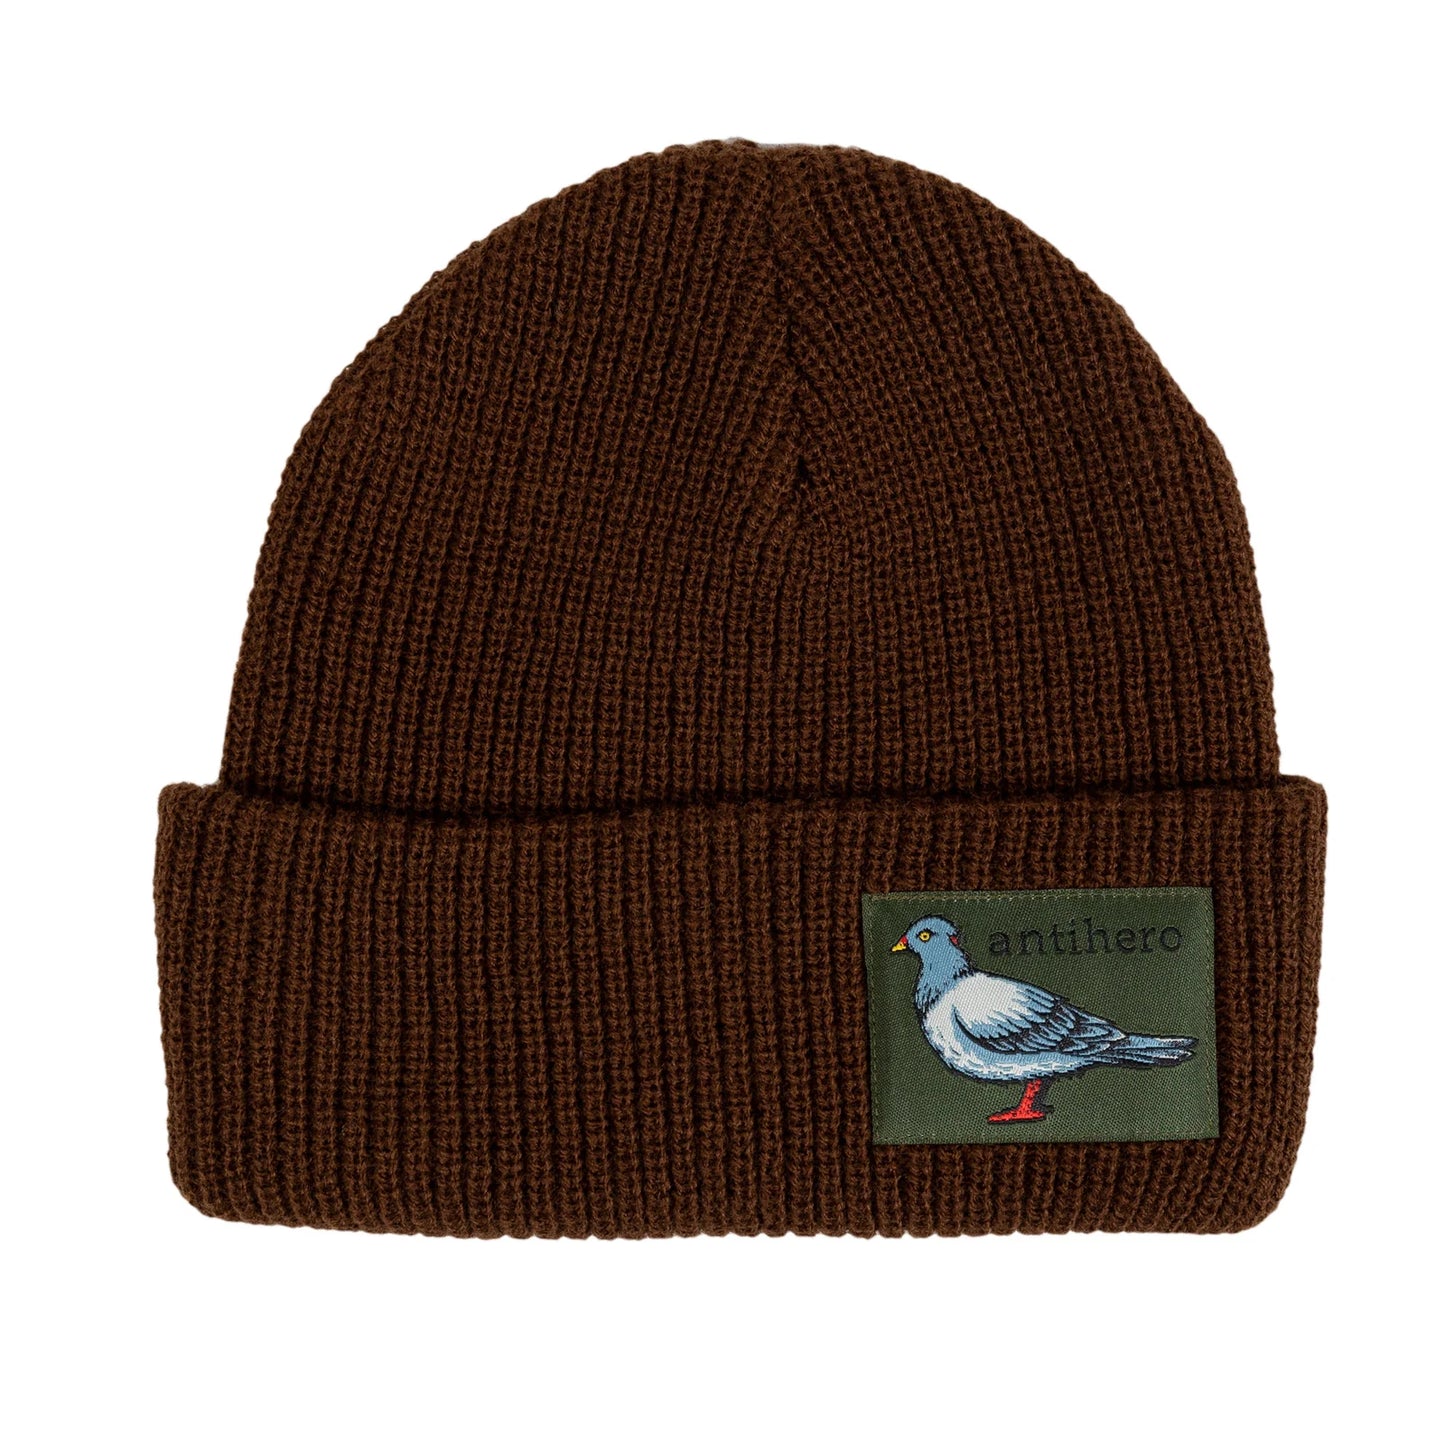 Lil Pigeon Cuff Patch Beanie(color options listed)OS